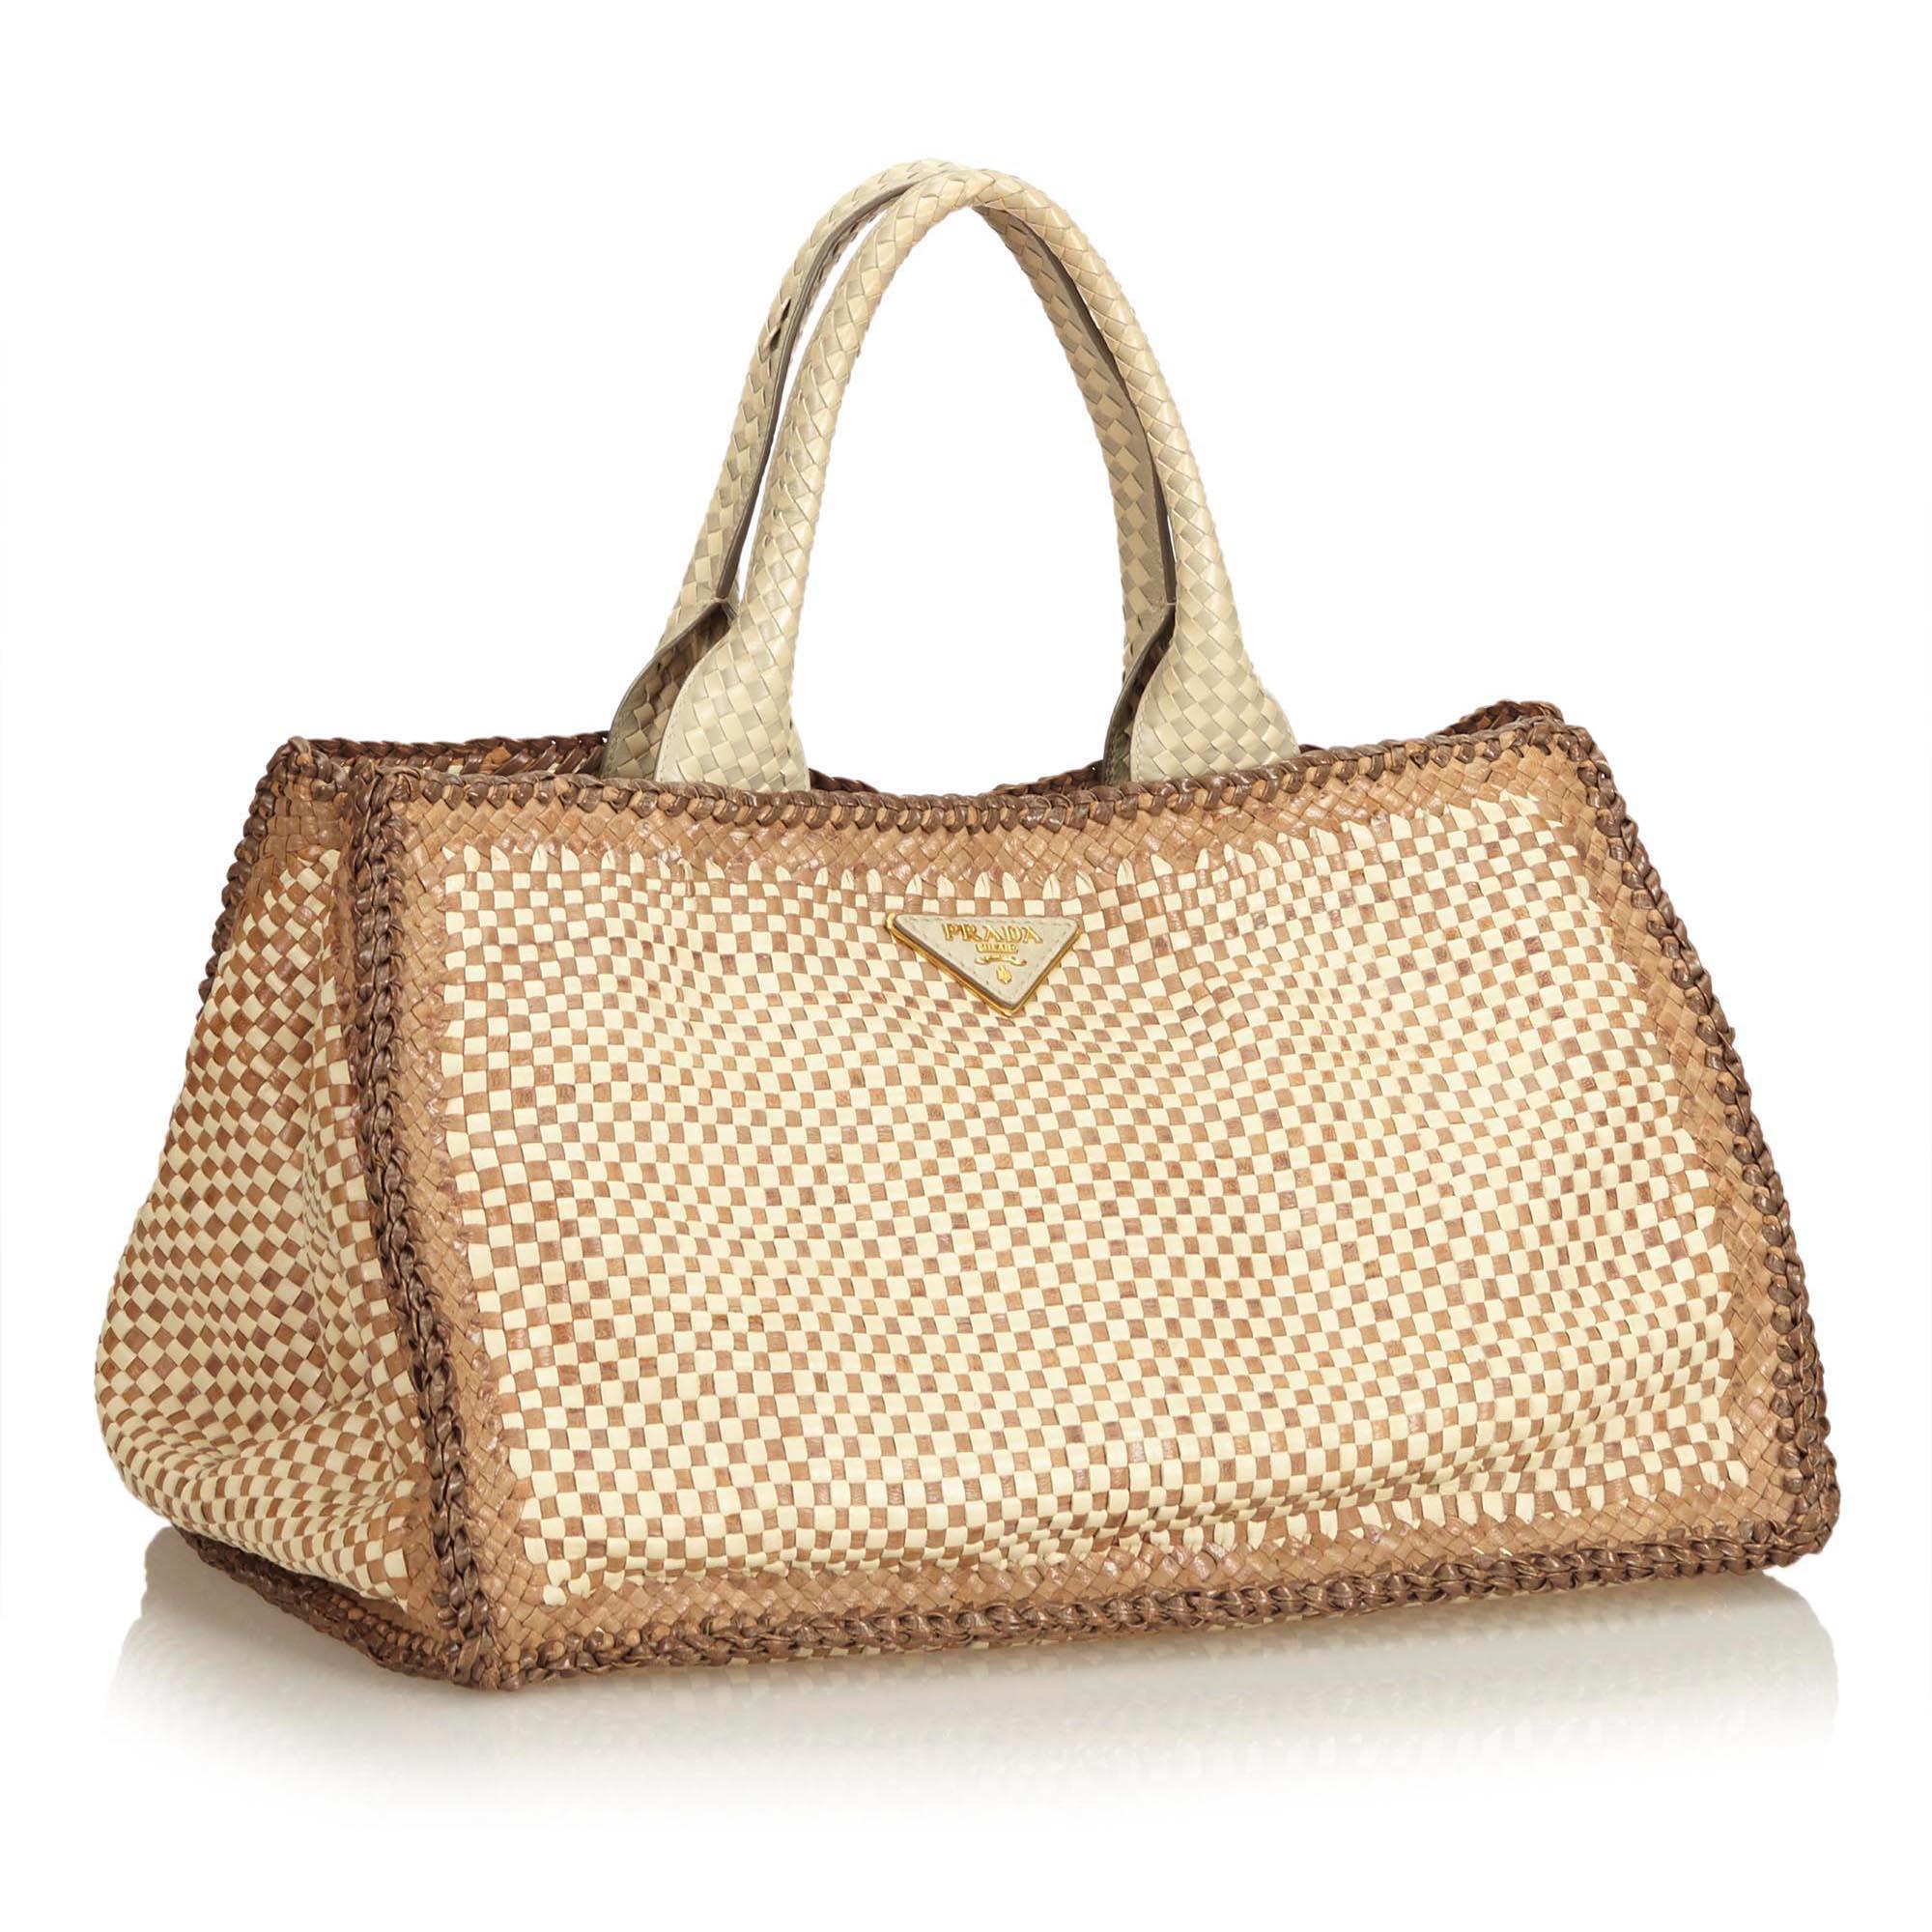 The Madras Tote features a woven leather body, braided leather handles, open top with magnetic snap closure, and interior zip and slip pockets. It carries as B+ condition rating.

Inclusions: 
Dust Bag

Dimensions:
Length: 26.00 cm
Width: 39.00